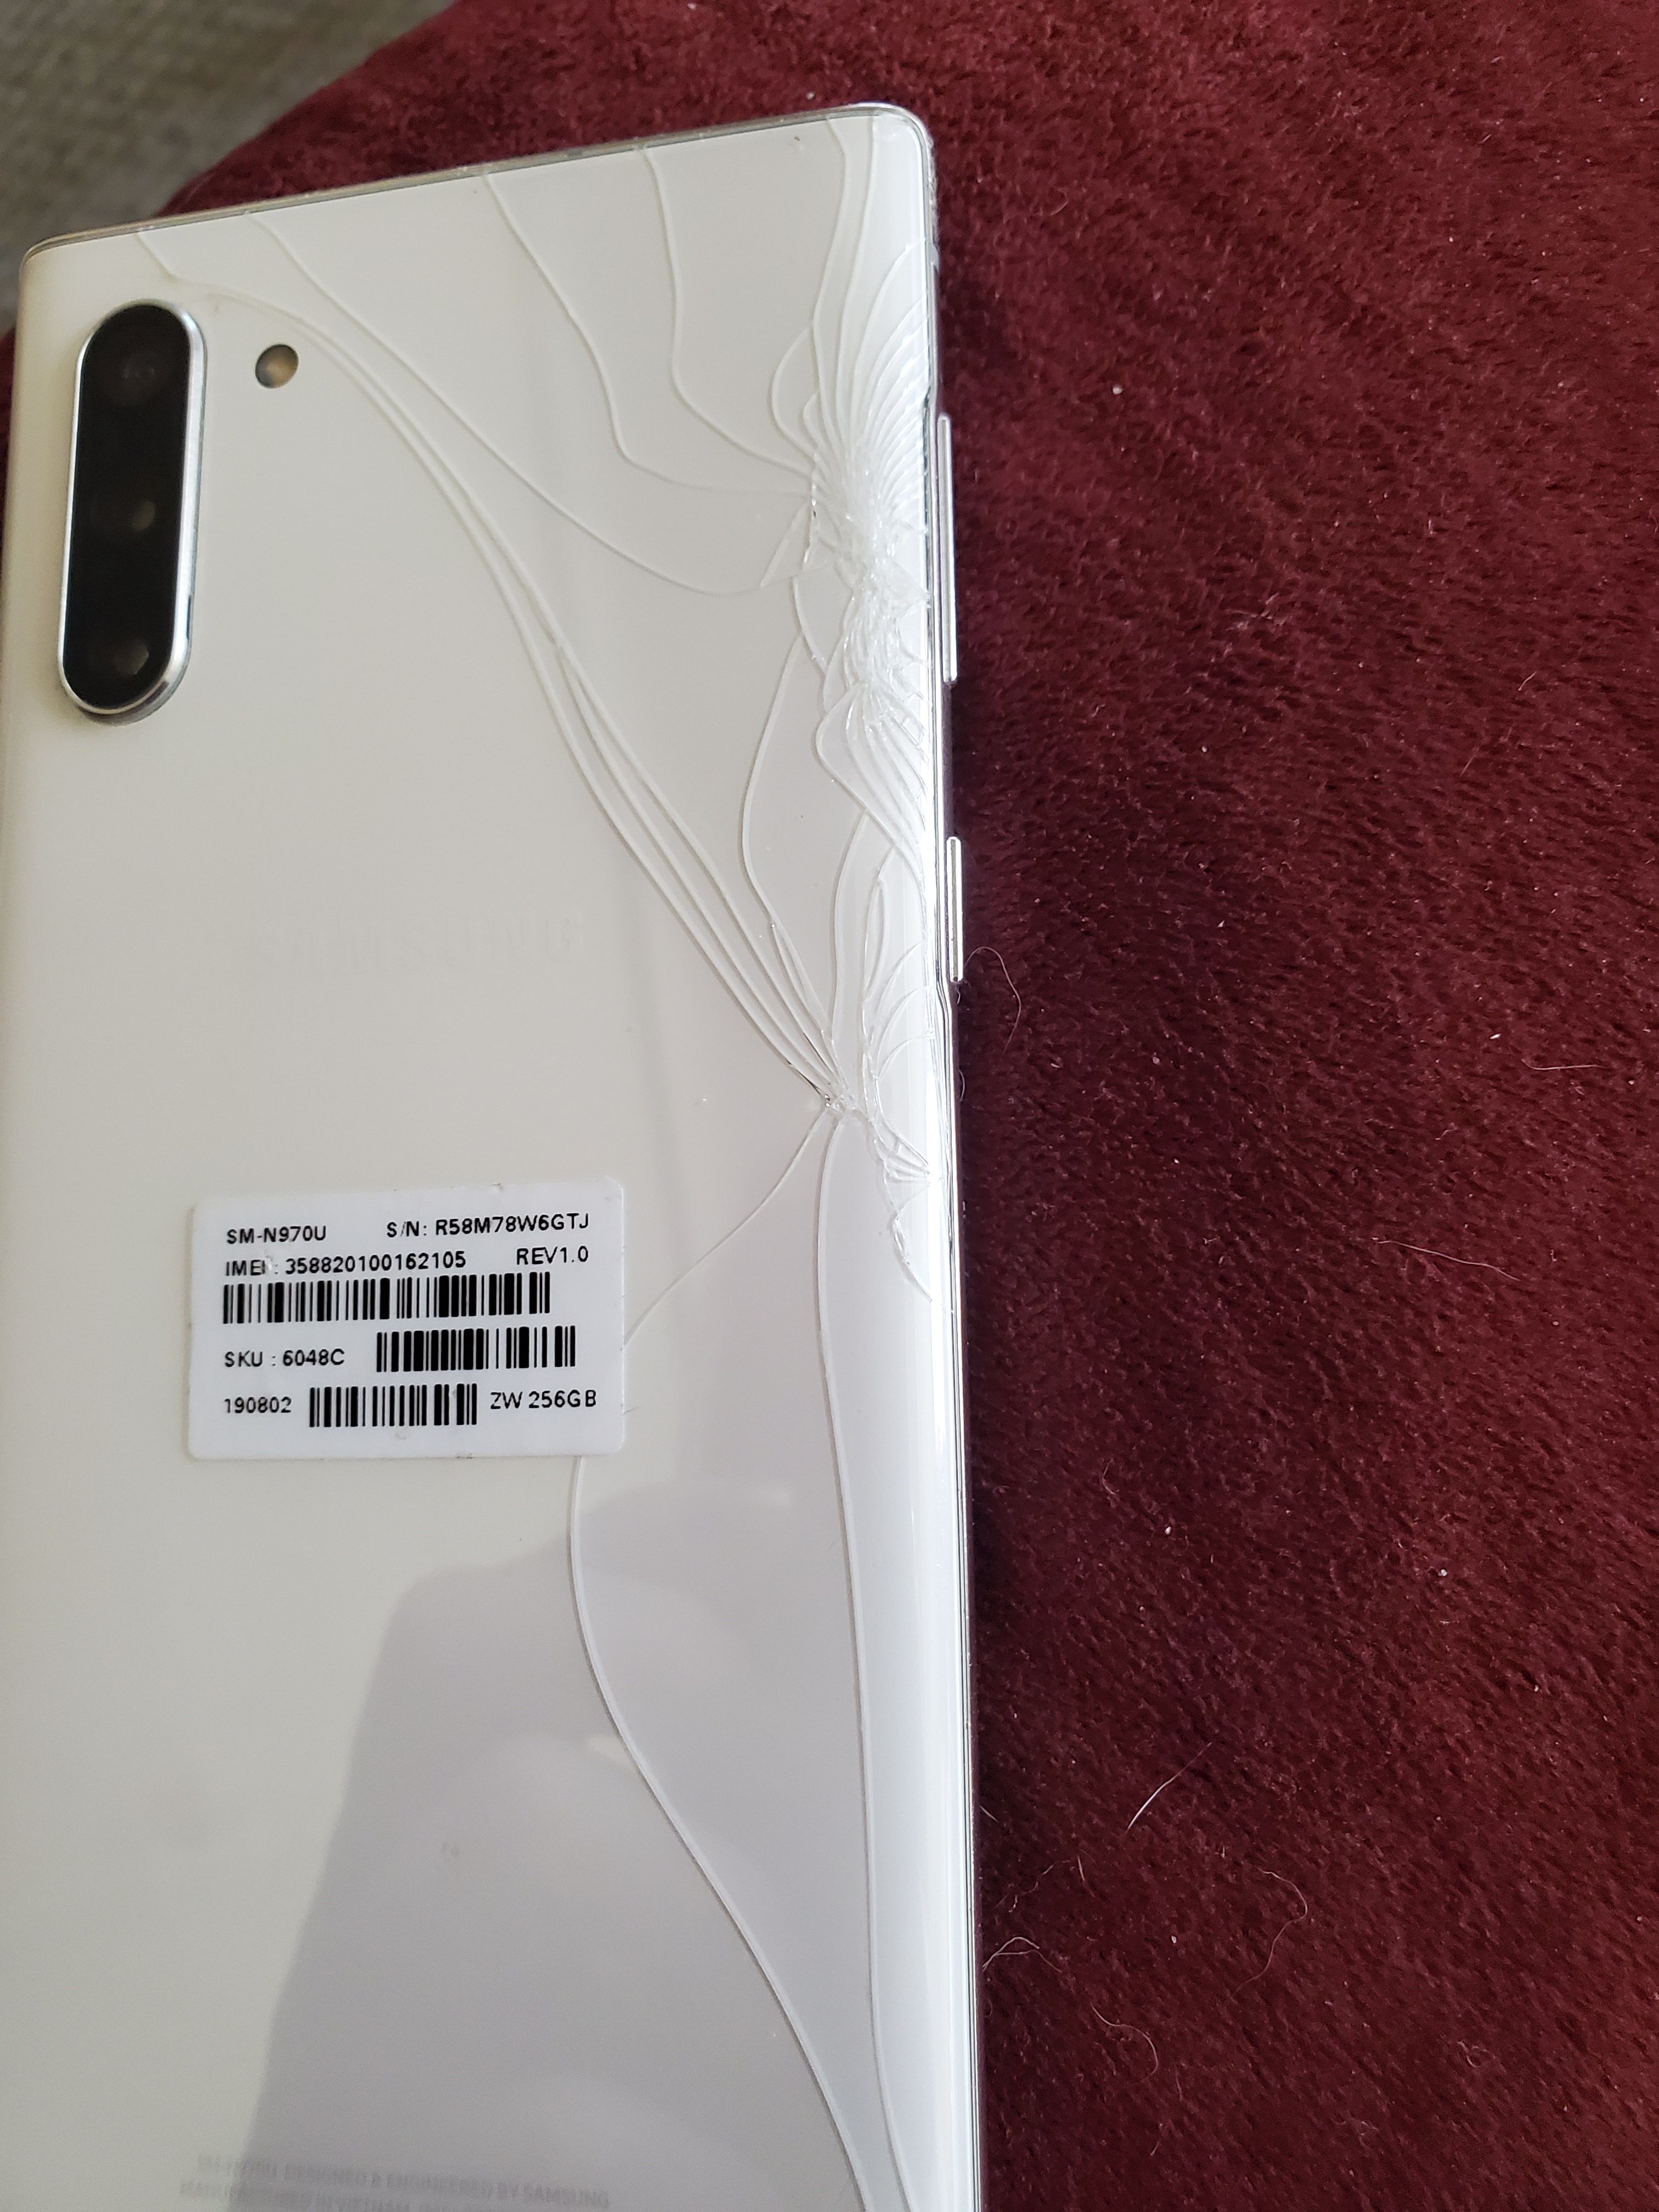 Note 10 cracked screen - Samsung Community